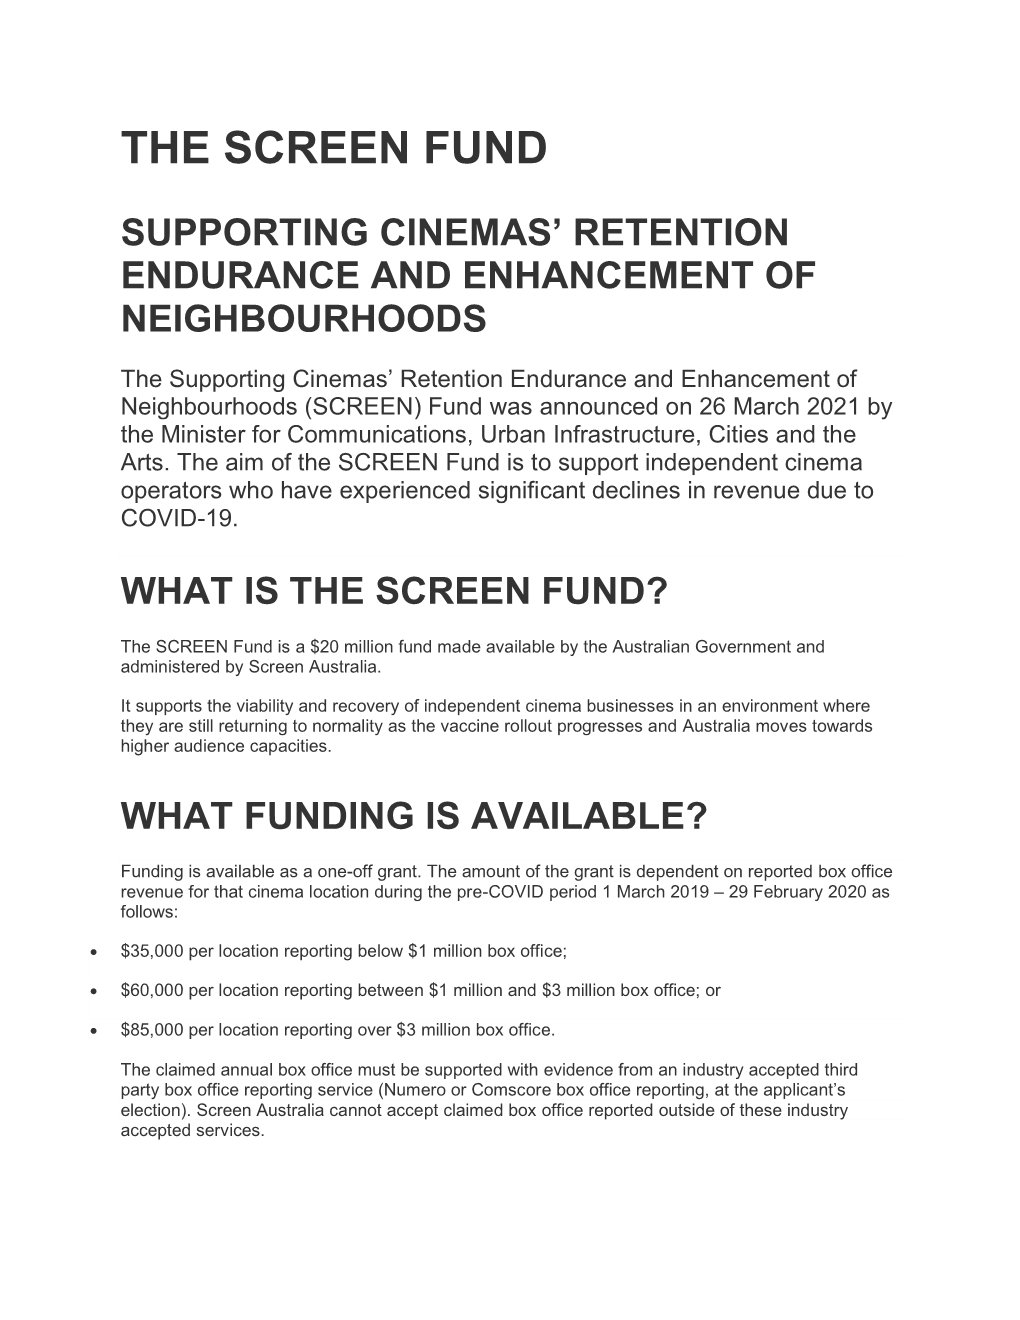 The Screen Fund